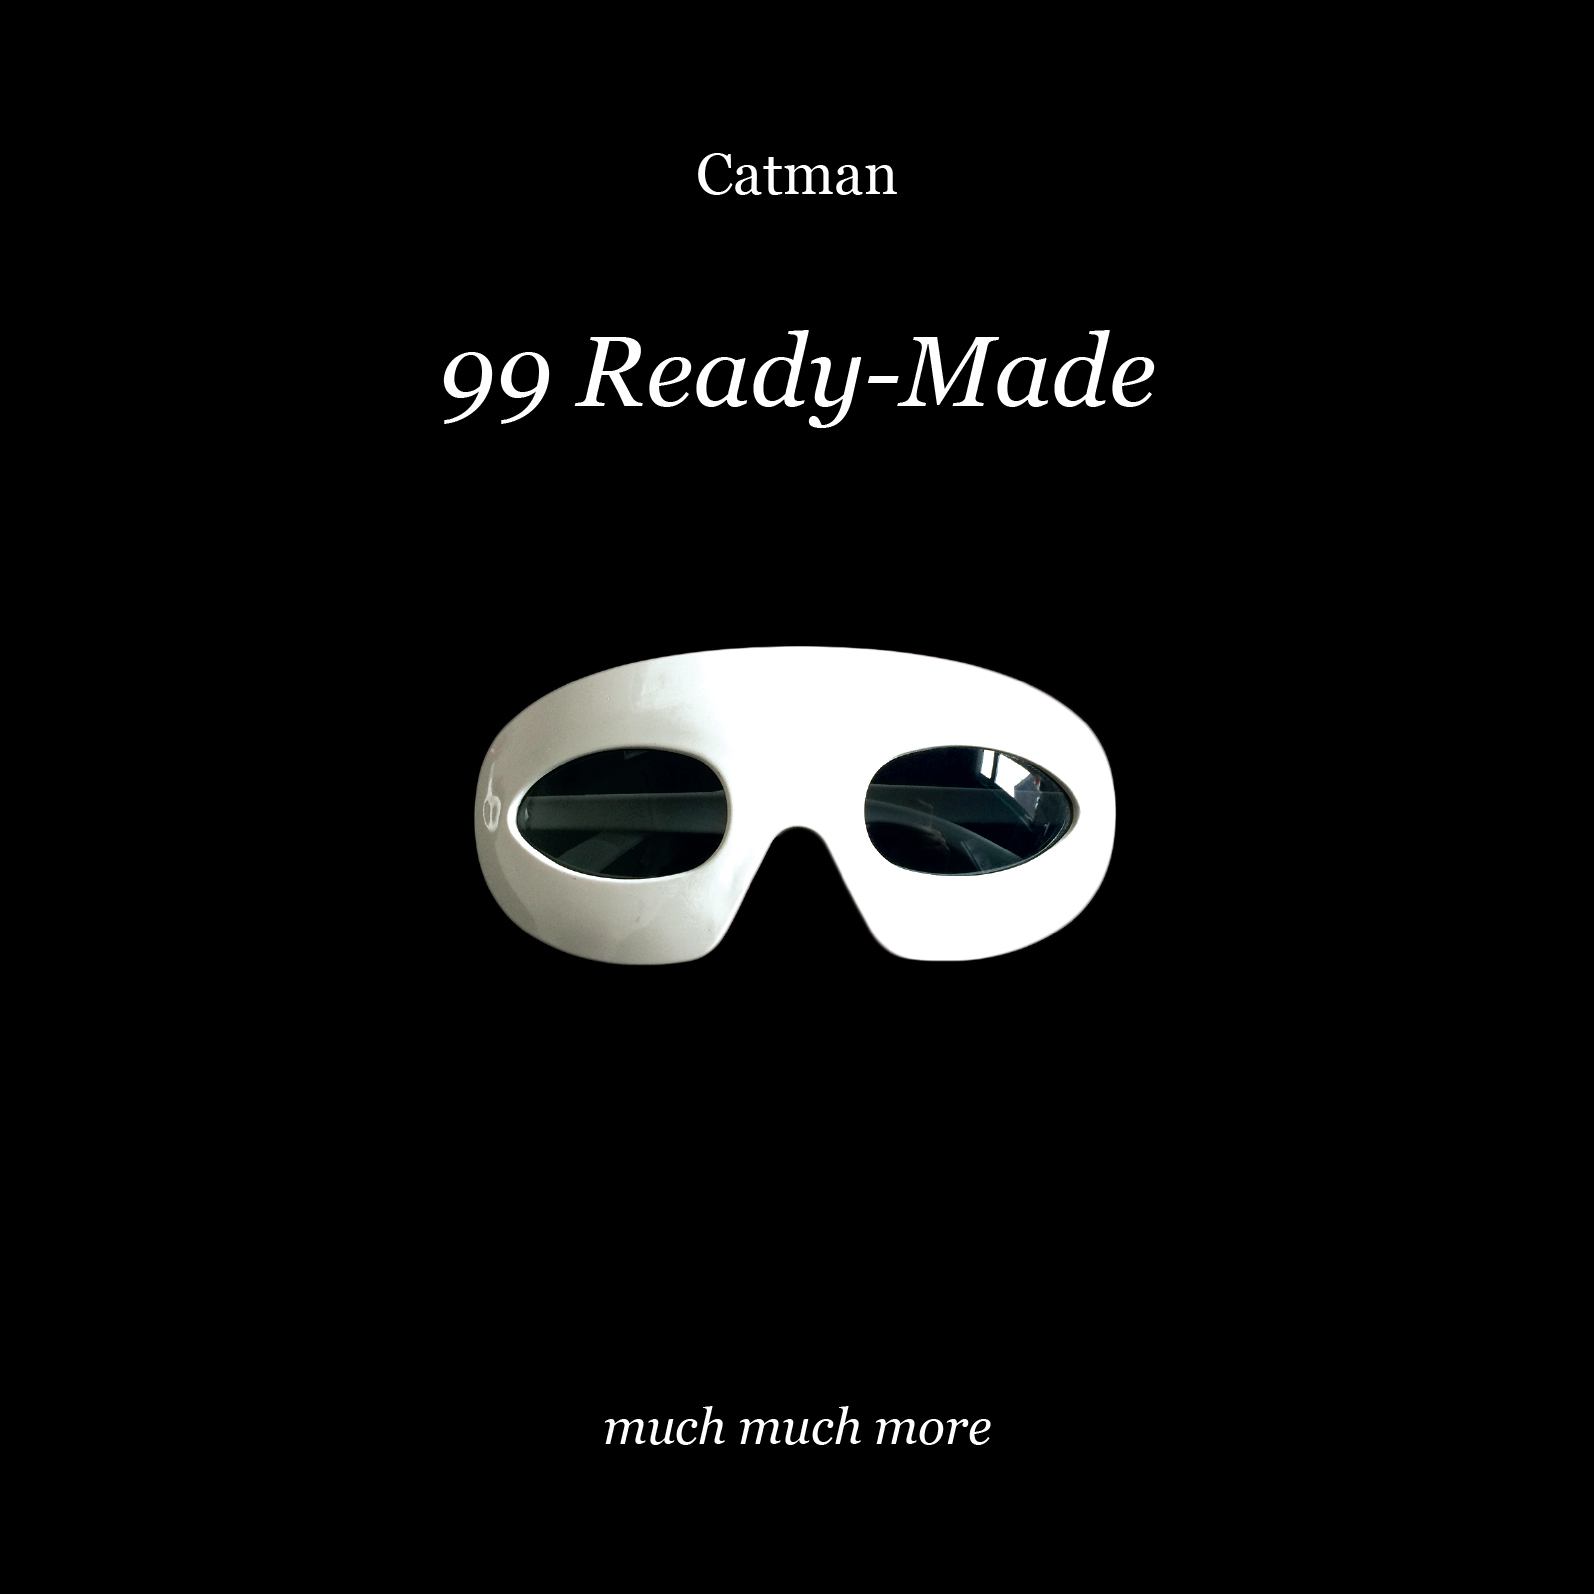 CATMAN - 99 READY- MADE Much Much More, 2017